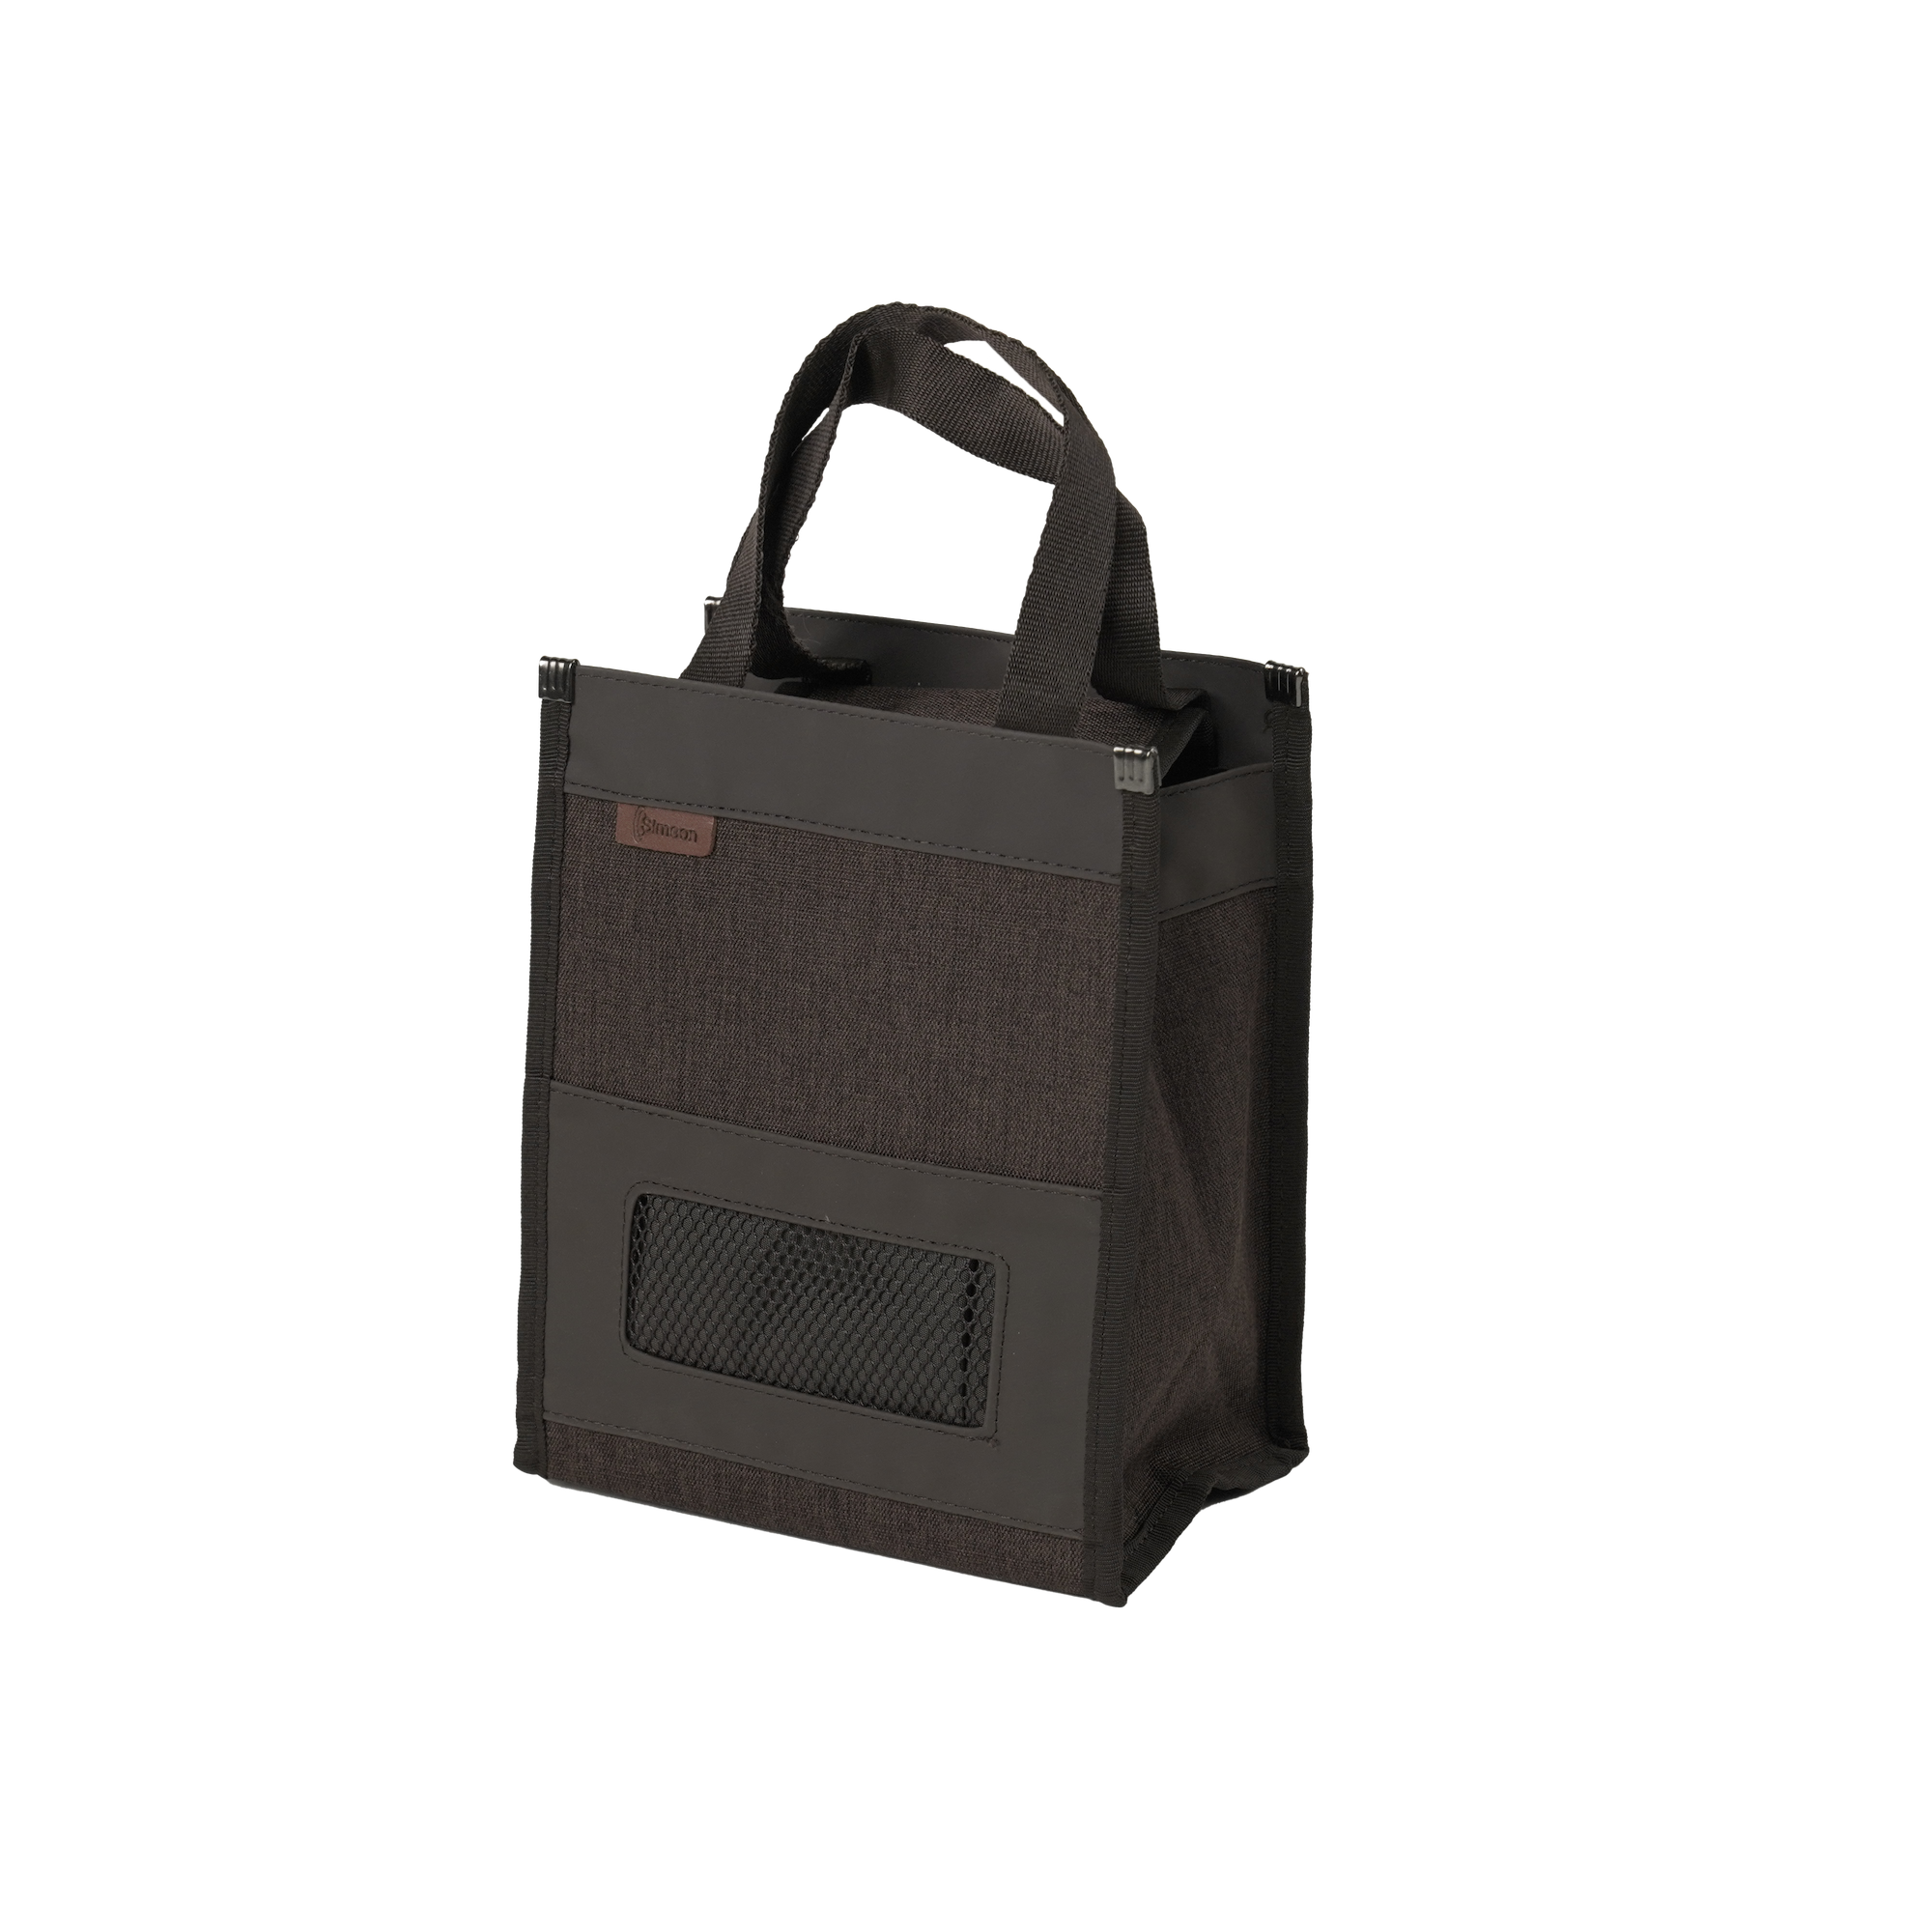 Sprek carry bag - trendy, compact, light, brown and durable. Protects audio system and equipment.